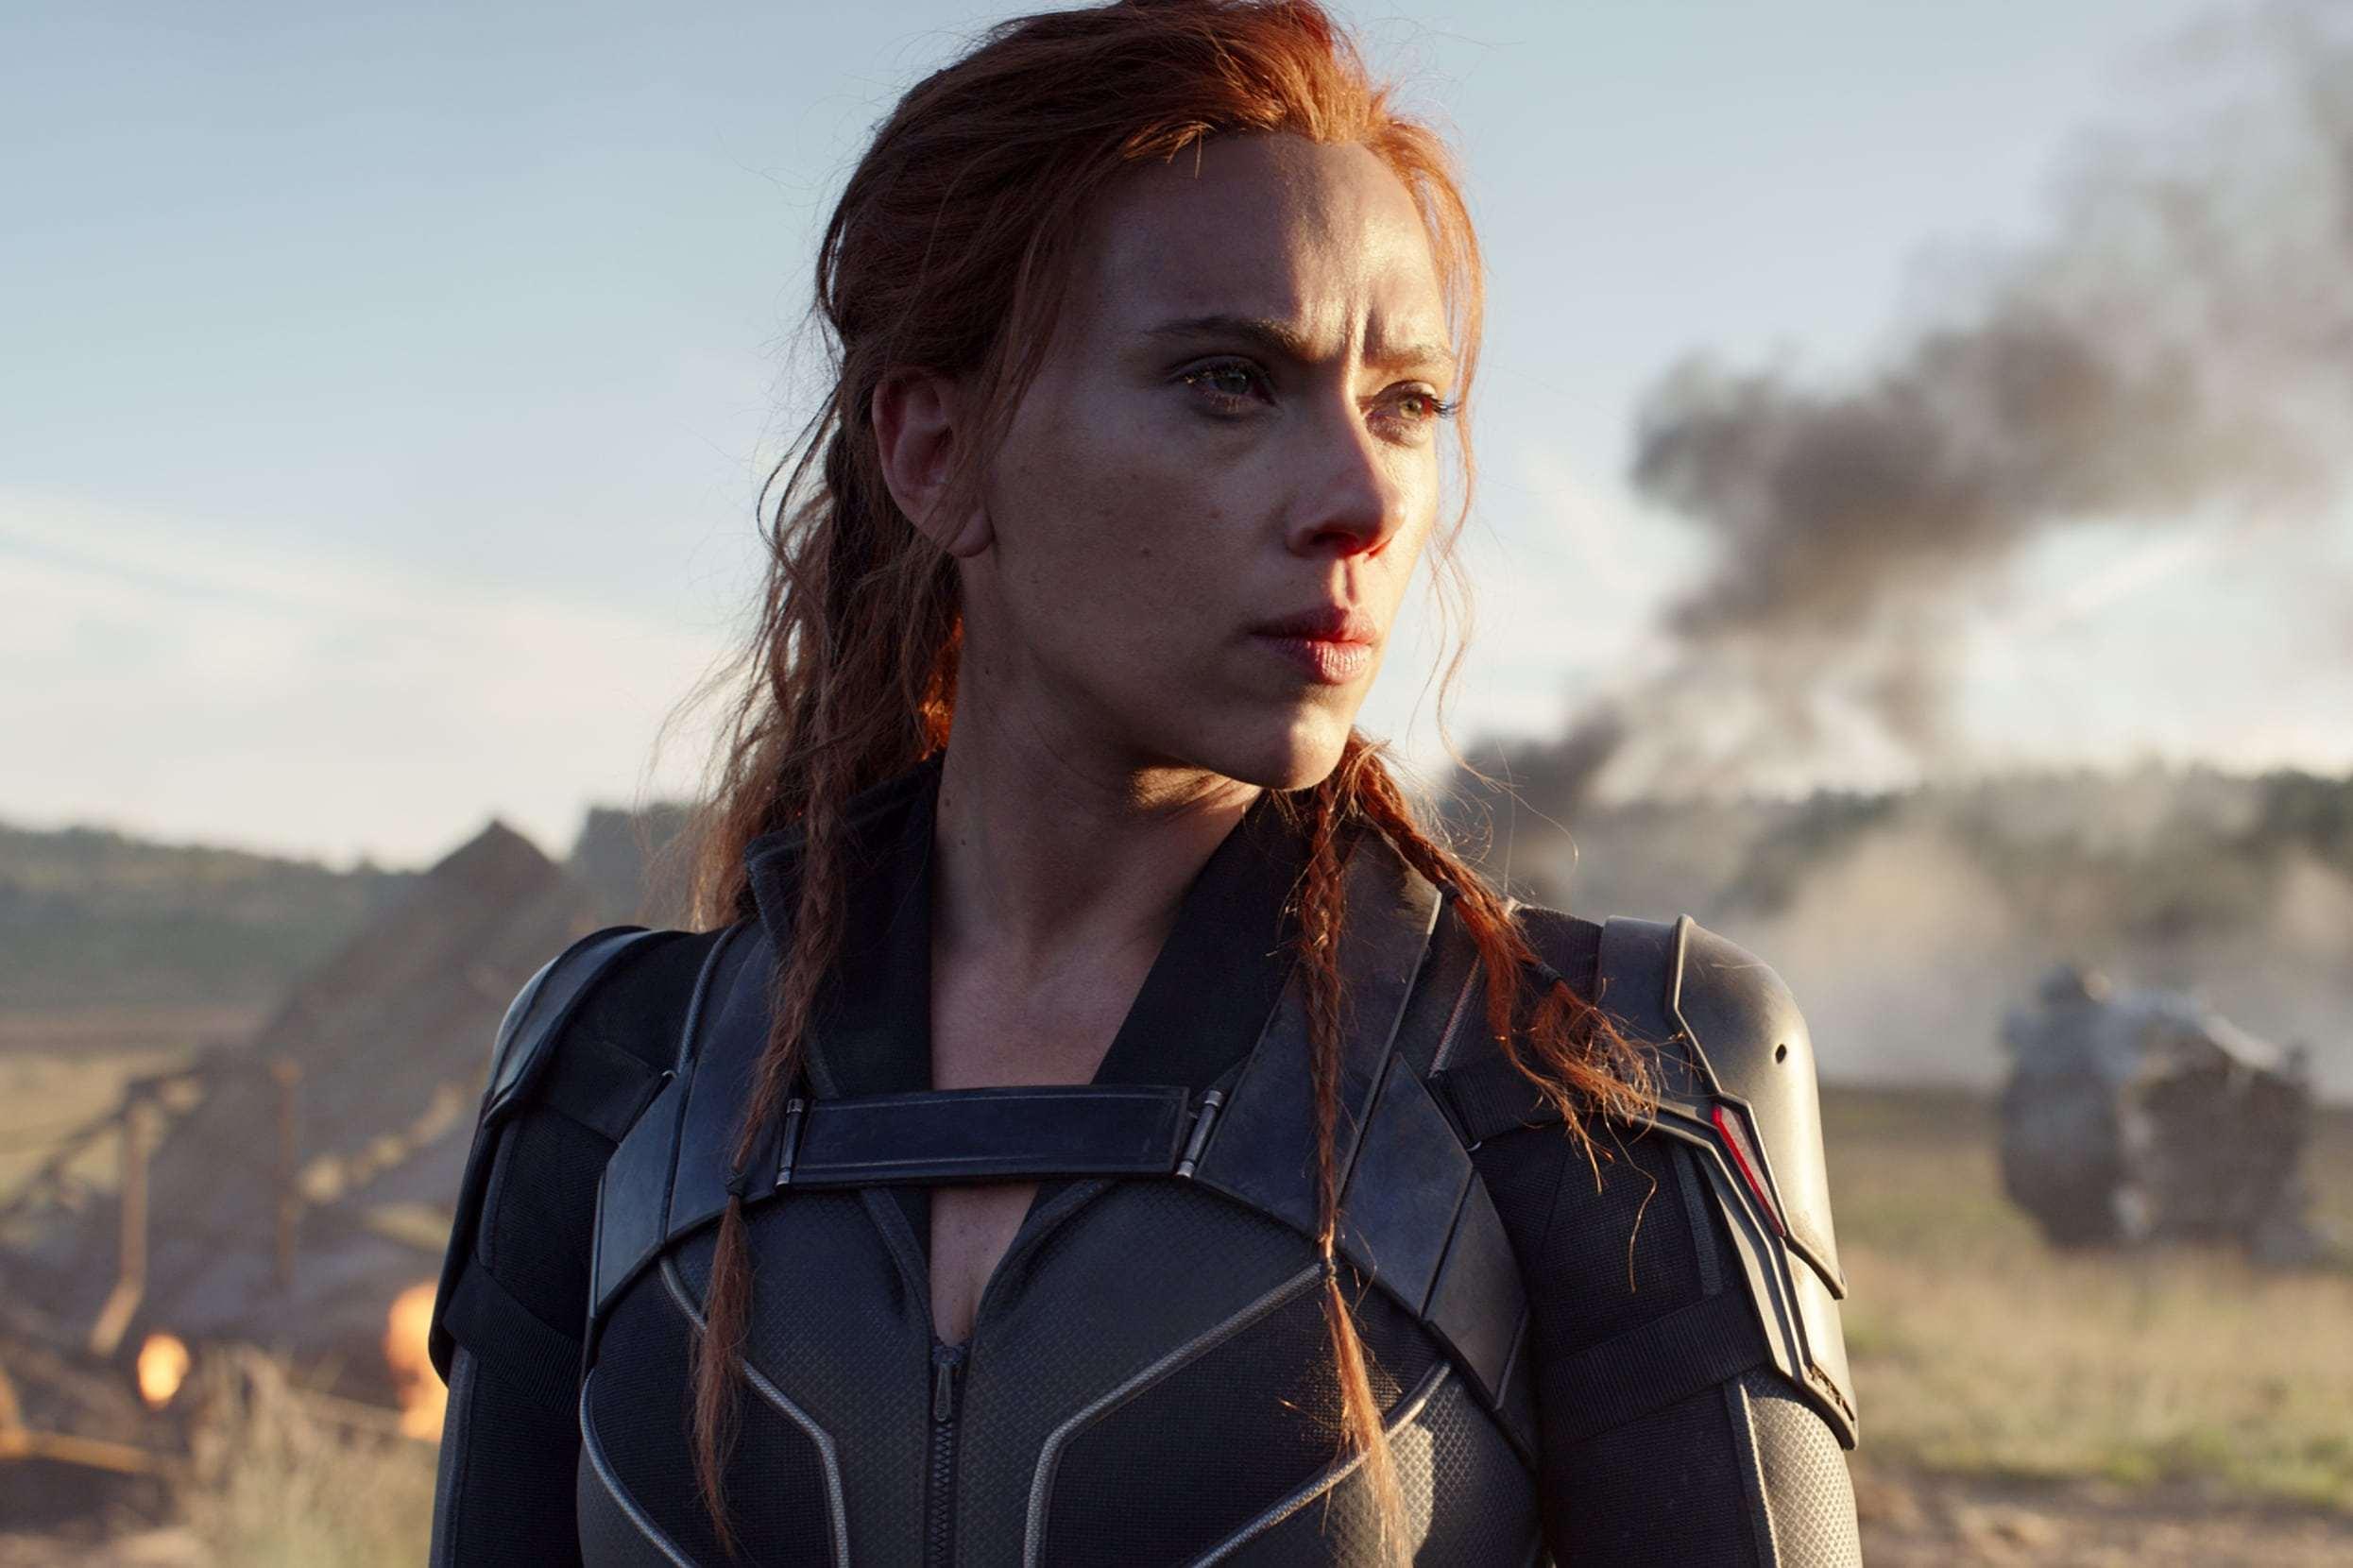 Cate Shortland's Black Widow feature film has been delayed indefinitely due to current world events.